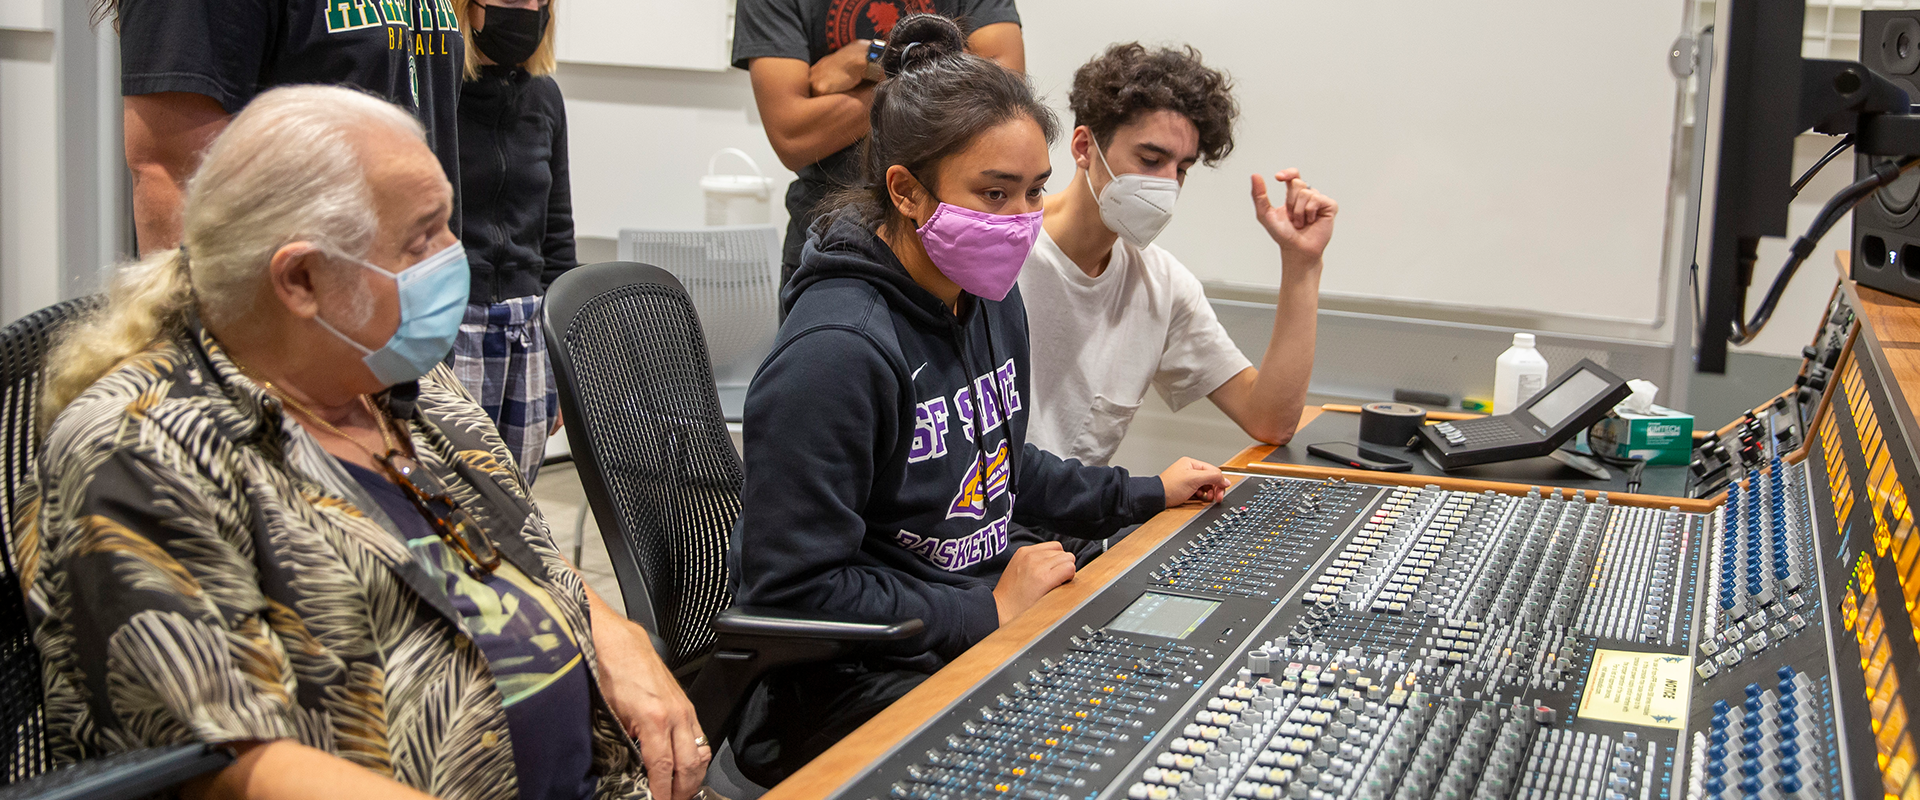 Students learning how to use an audio mixer.